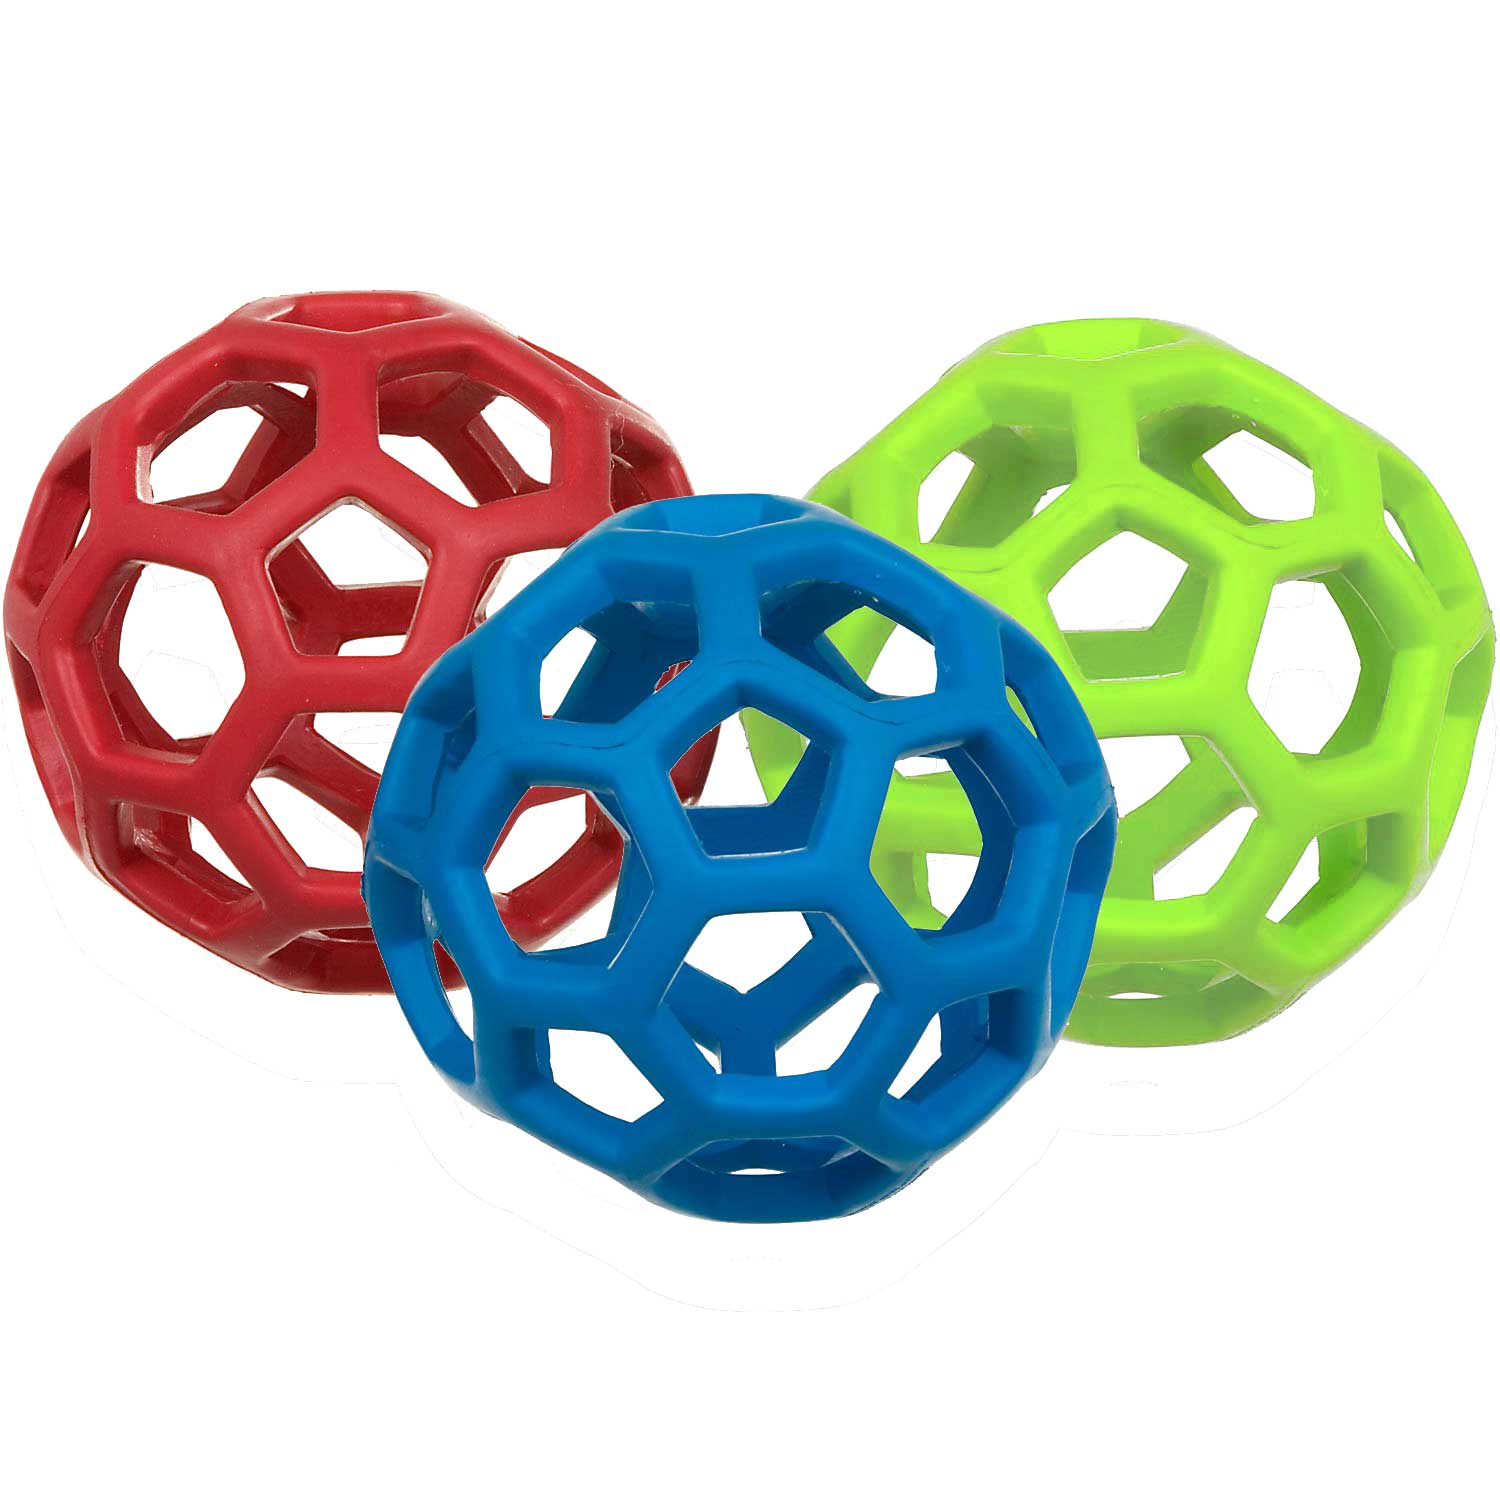 dog ball with holes